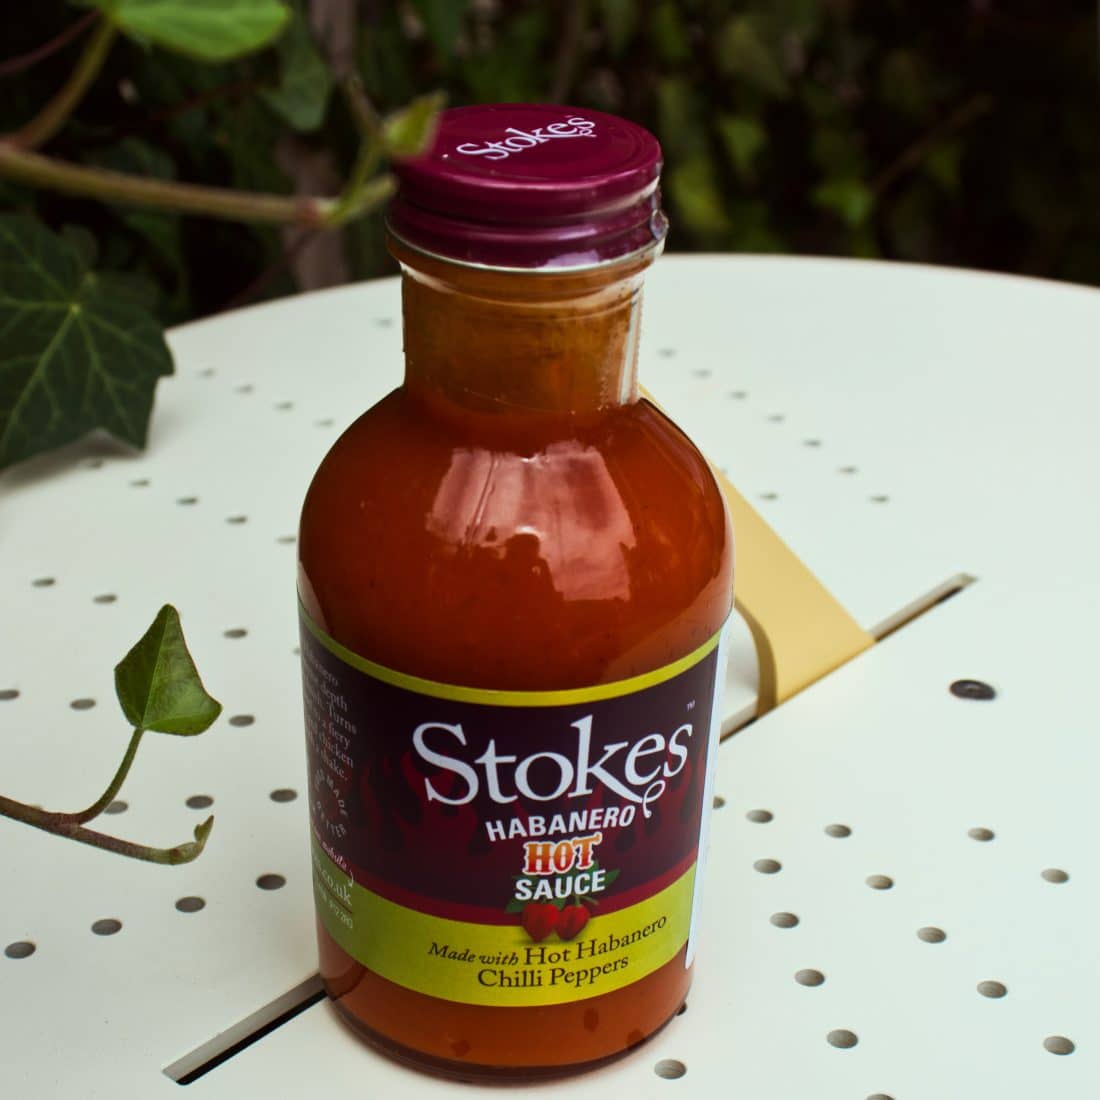 Try this delicious hot sauce now to spice up your dishes!